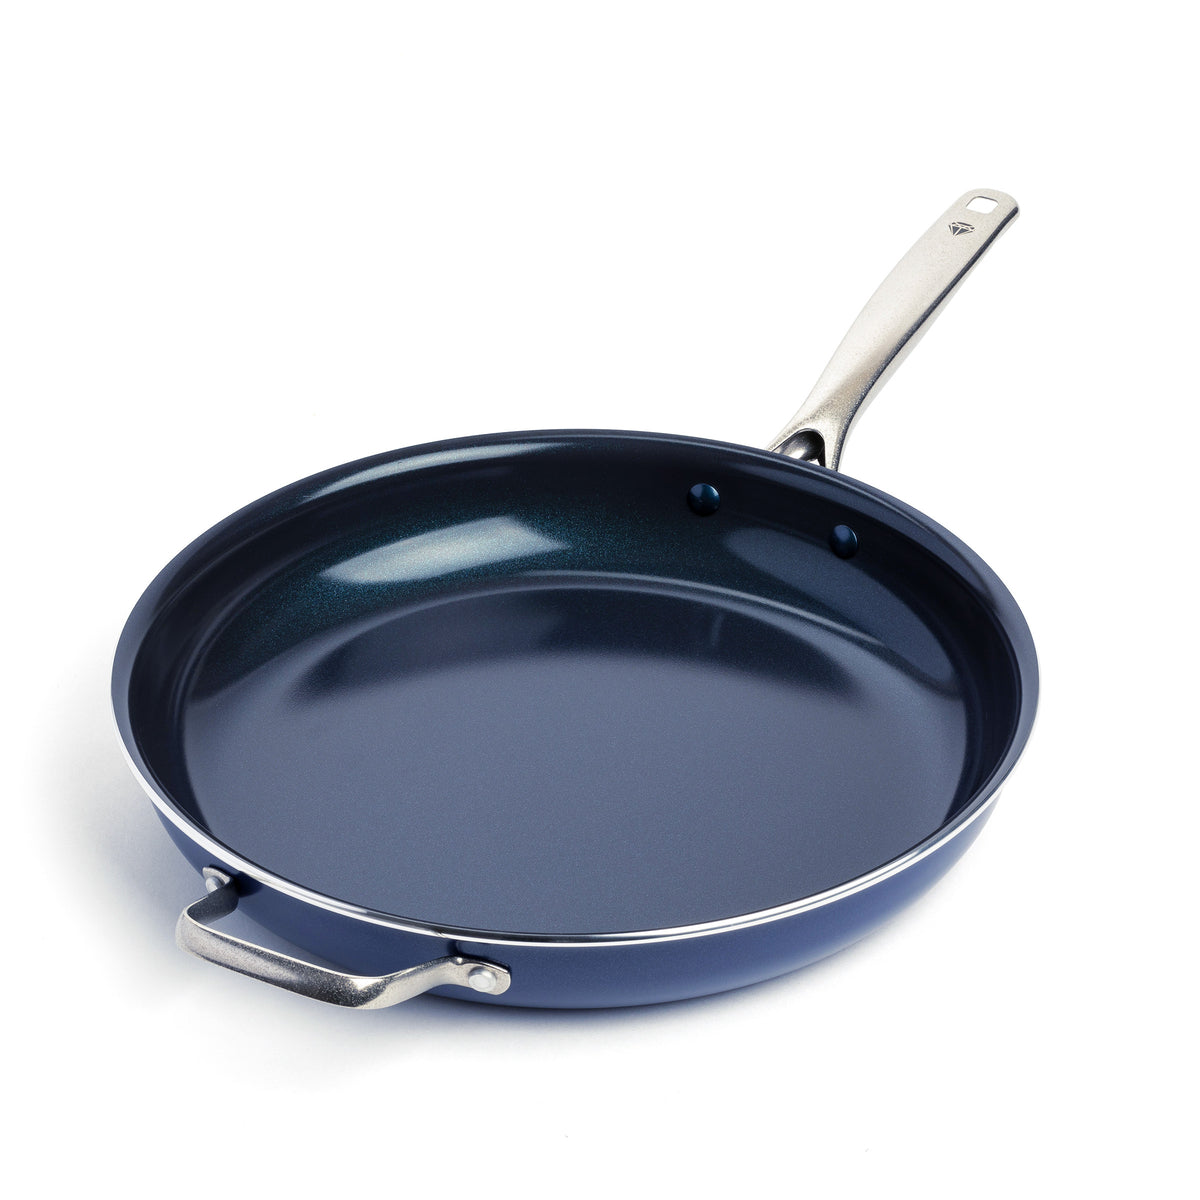 14 Fry Pan With Lid - Extra Large Skillet Nonstick Frying Pan 14